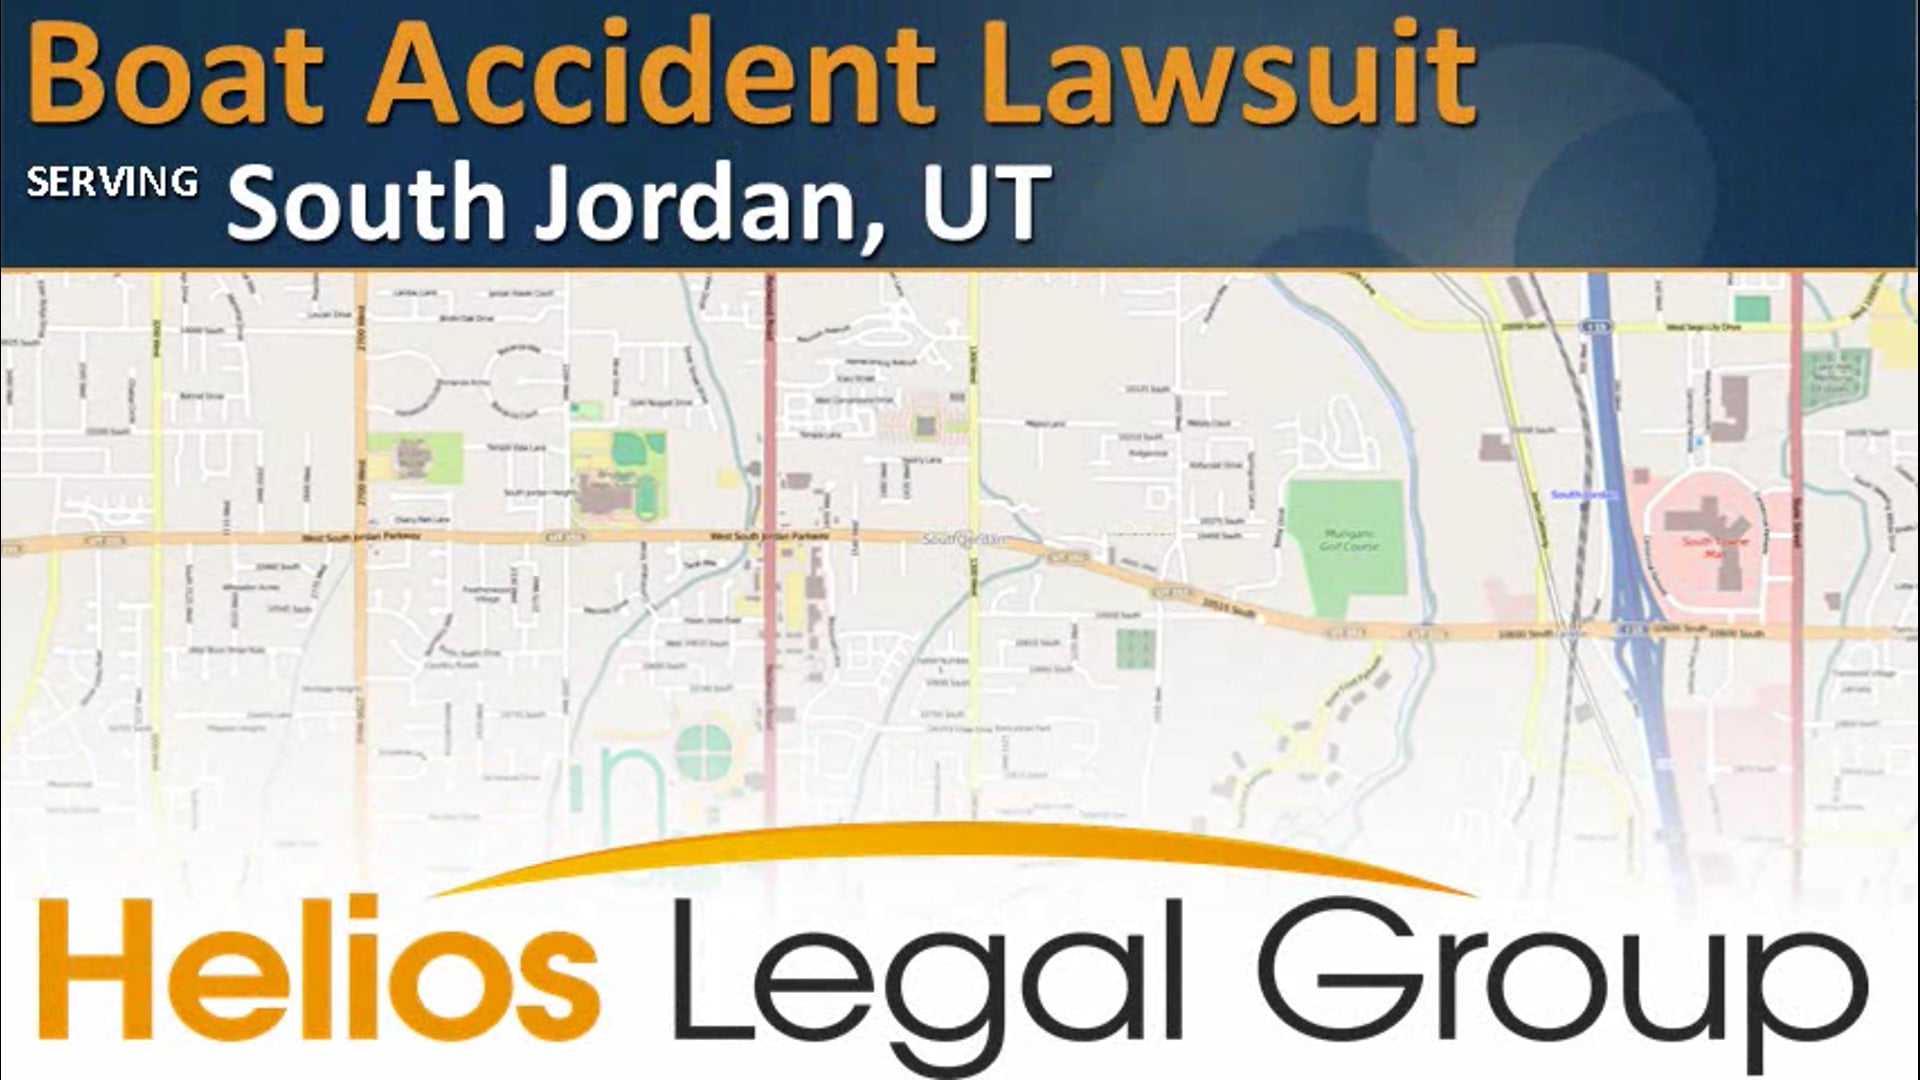 Boat Accident legal question? Talk to a lawyer right now! 1-888-577-5988 – South Jordan, UT